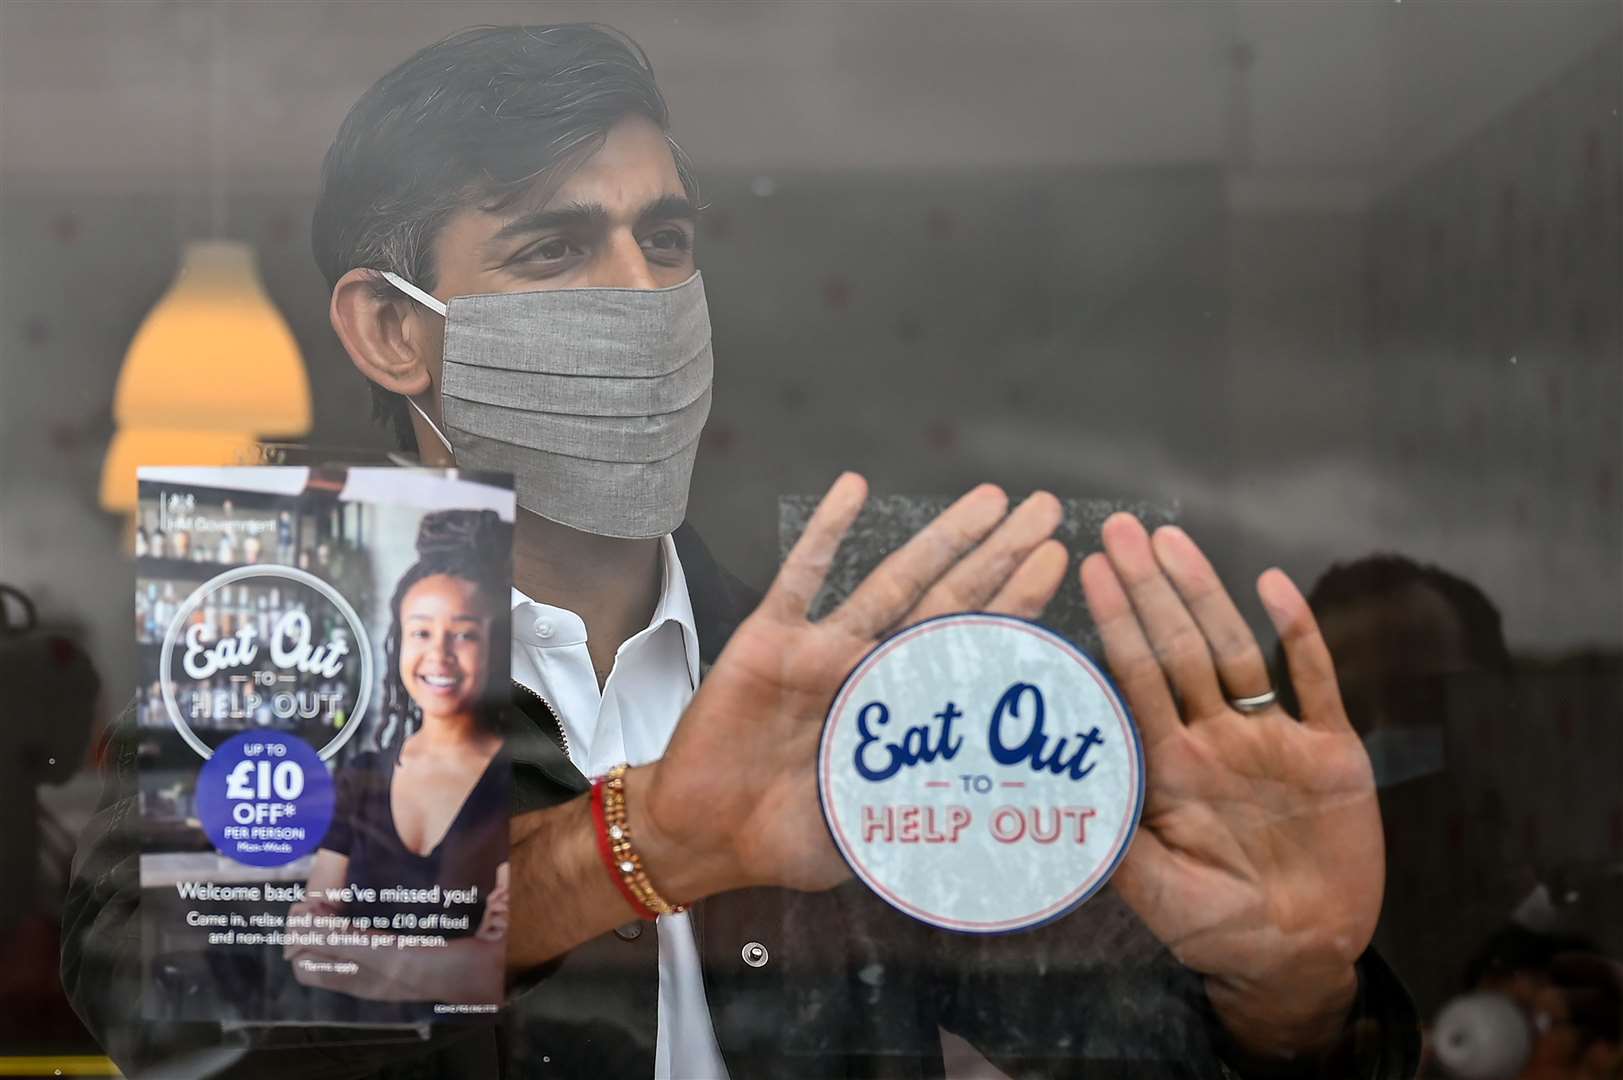 Rishi Sunak was chancellor during the pandemic when he announced the Eat Out To Help Out scheme (Jeff J Mitchell/PA)